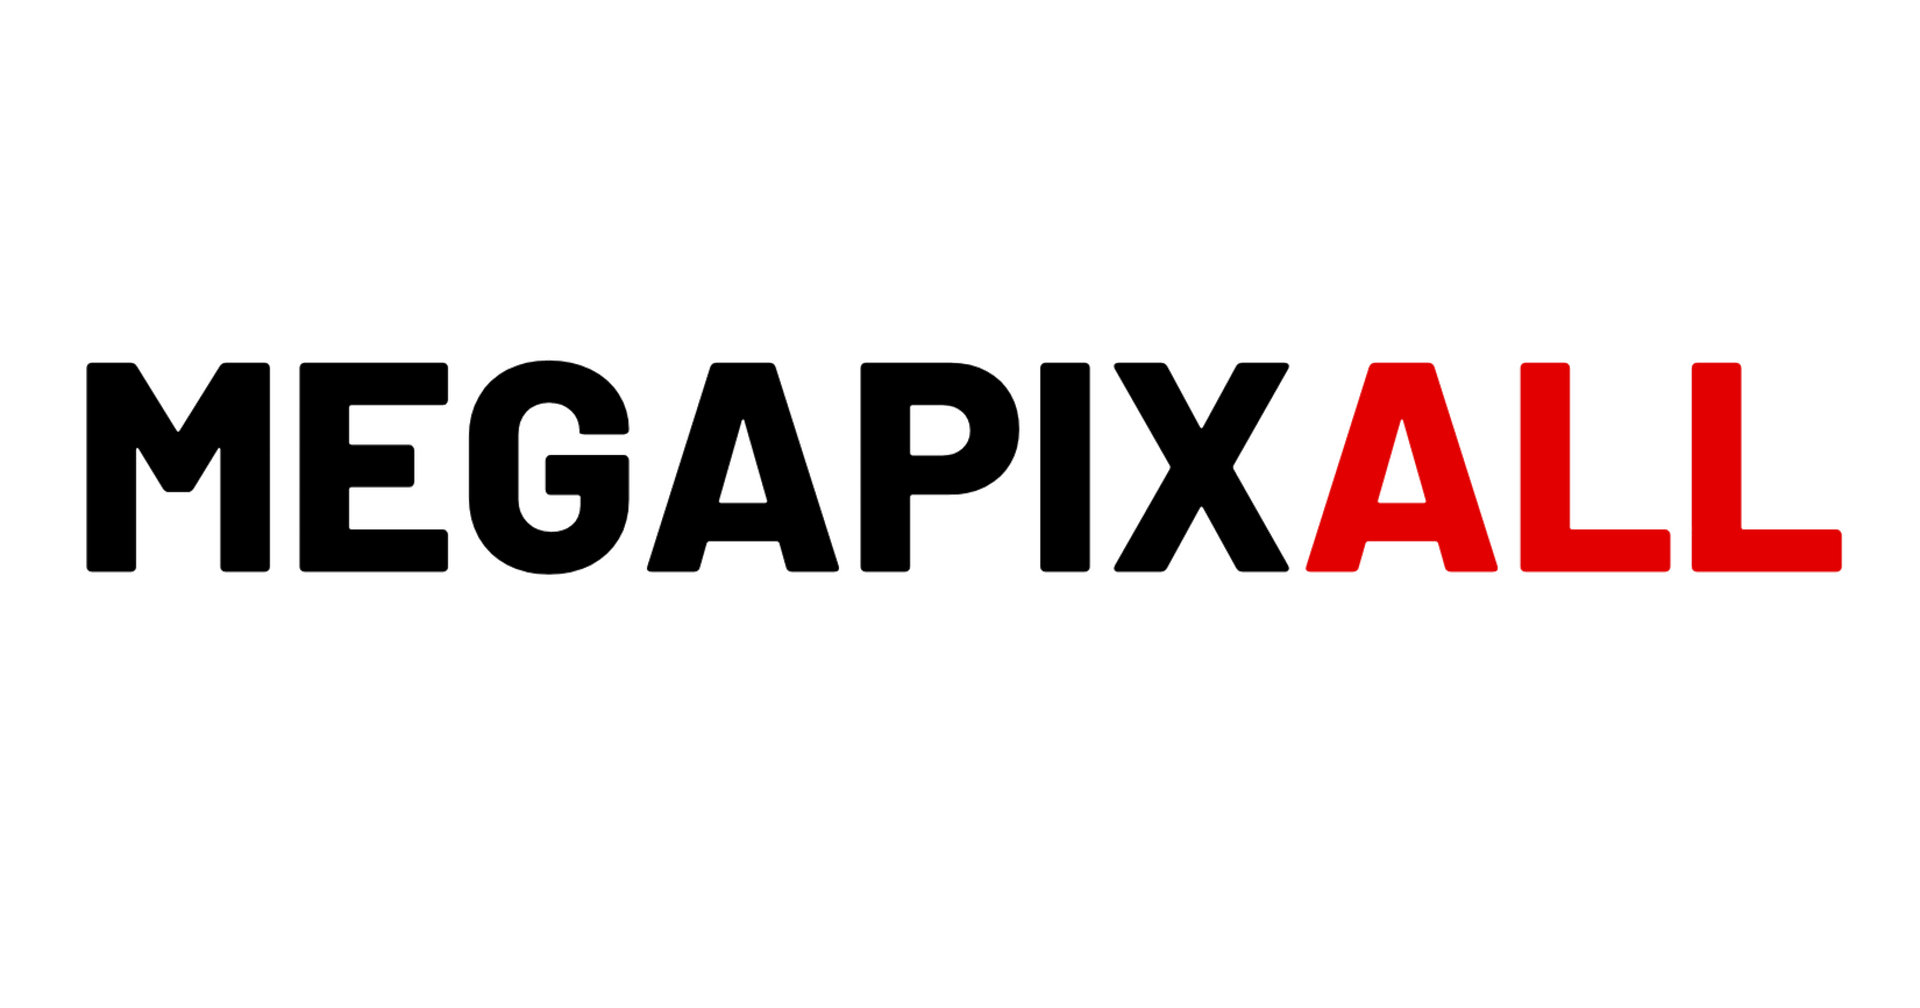 the logo for megapixall is black and red on a white background .